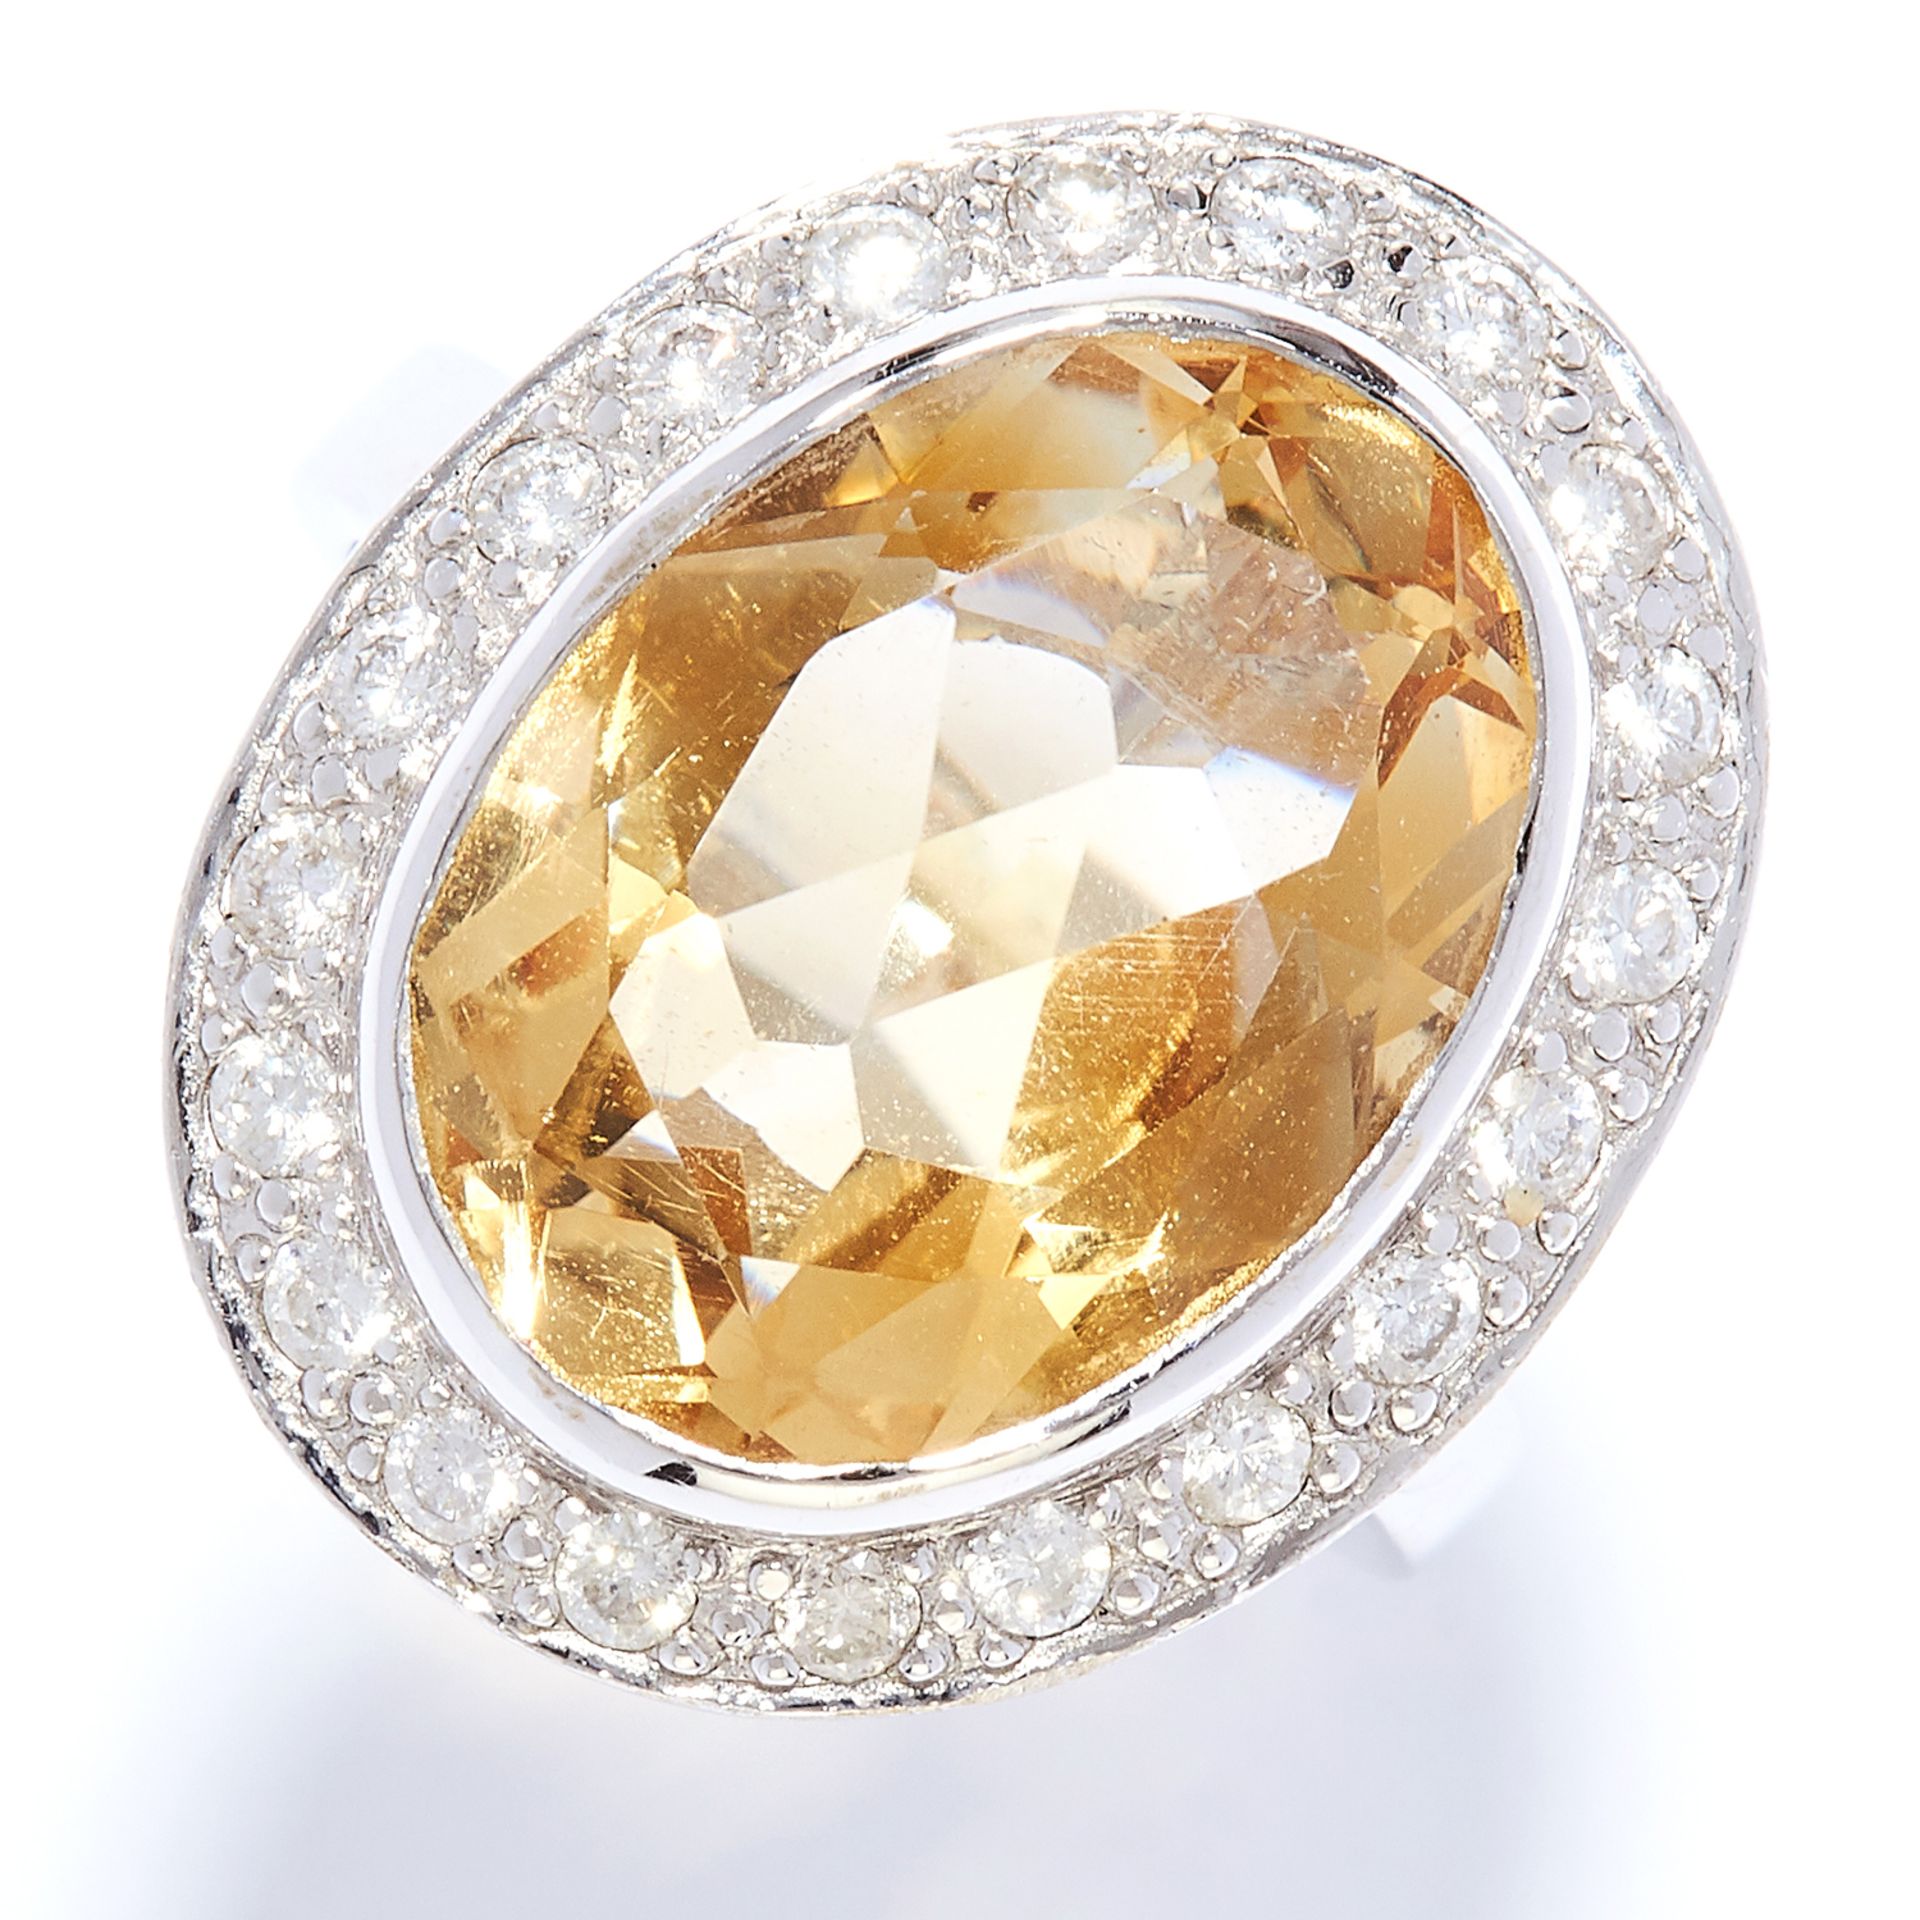 CITRINE AND DIAMOND CLUSTER RING in 18ct white gold, set with an oval cut citrine in a border of